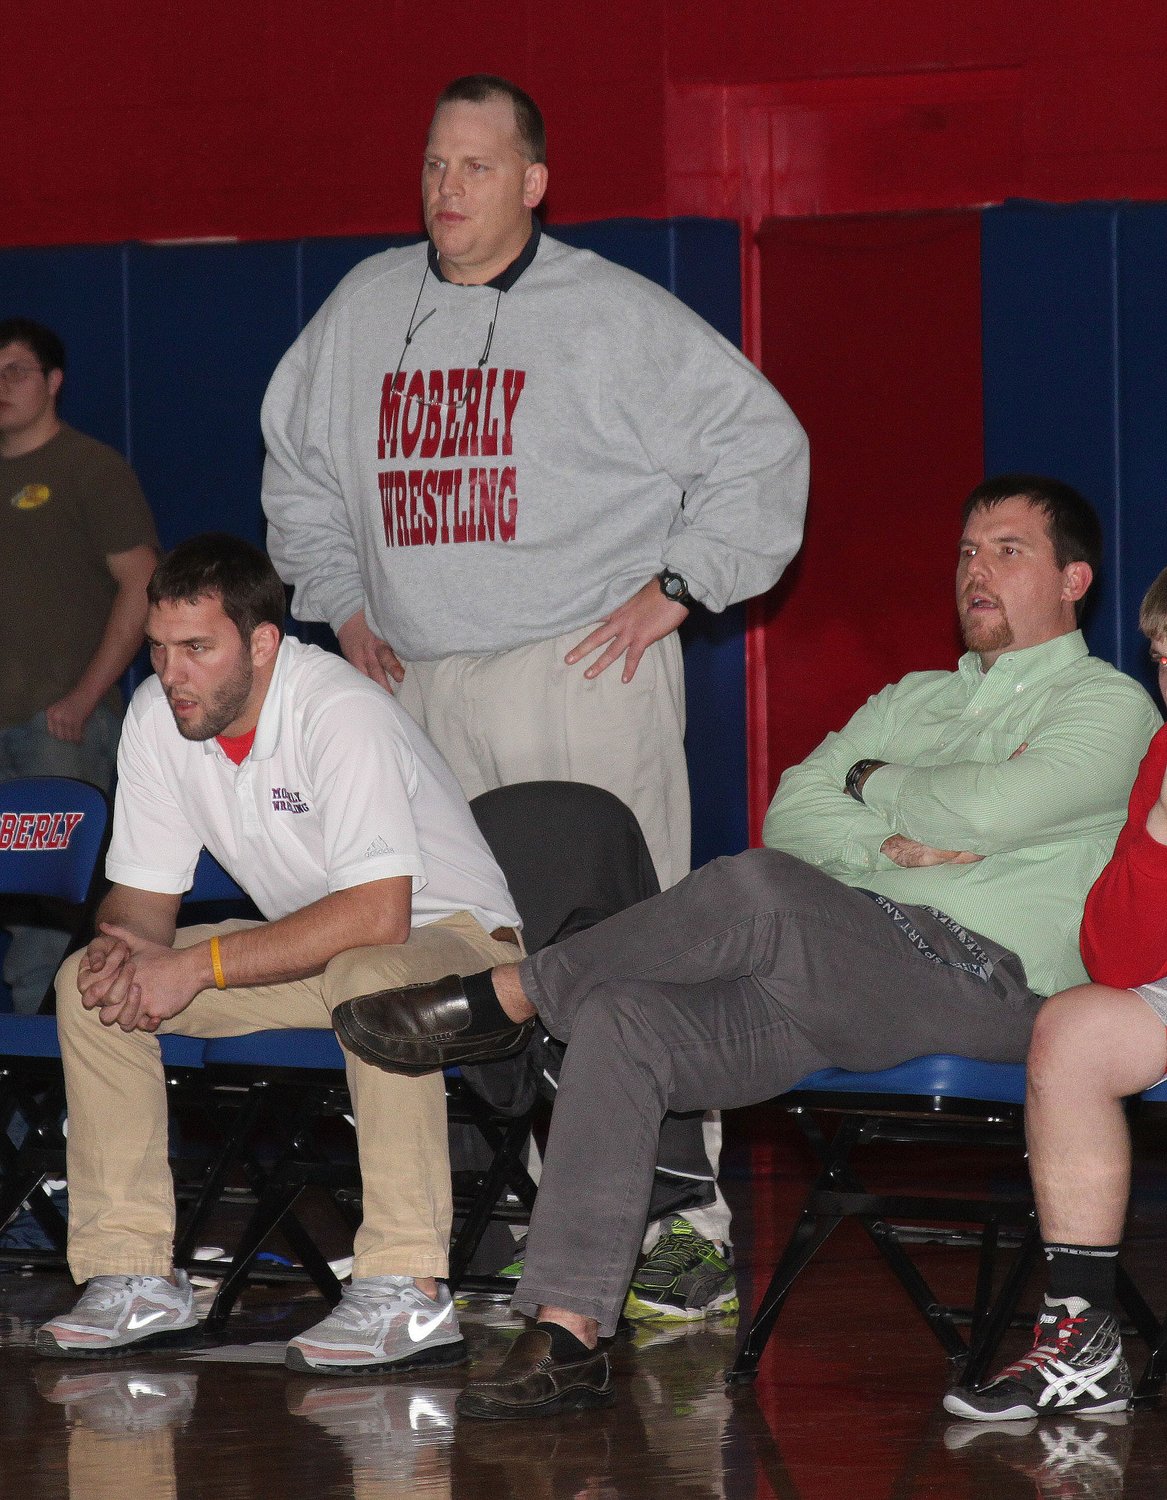 Moberly varsity head wrestling coach Sam Richardson stands behind his assistant coaches Charlie Gibbs, left, and Tim Barnett, as the trio observe action on the mat during a Jan. 27, 2015 home dual against Fulton. Richardson served 11 years as head wrestling coach before he retired in March 2016 and accepted the position of becoming the Moberly Area Technical School Director. He continued to serve as a volunteer assistant football coach thereafter. Richardson, 53, passed away July 31, 2021.